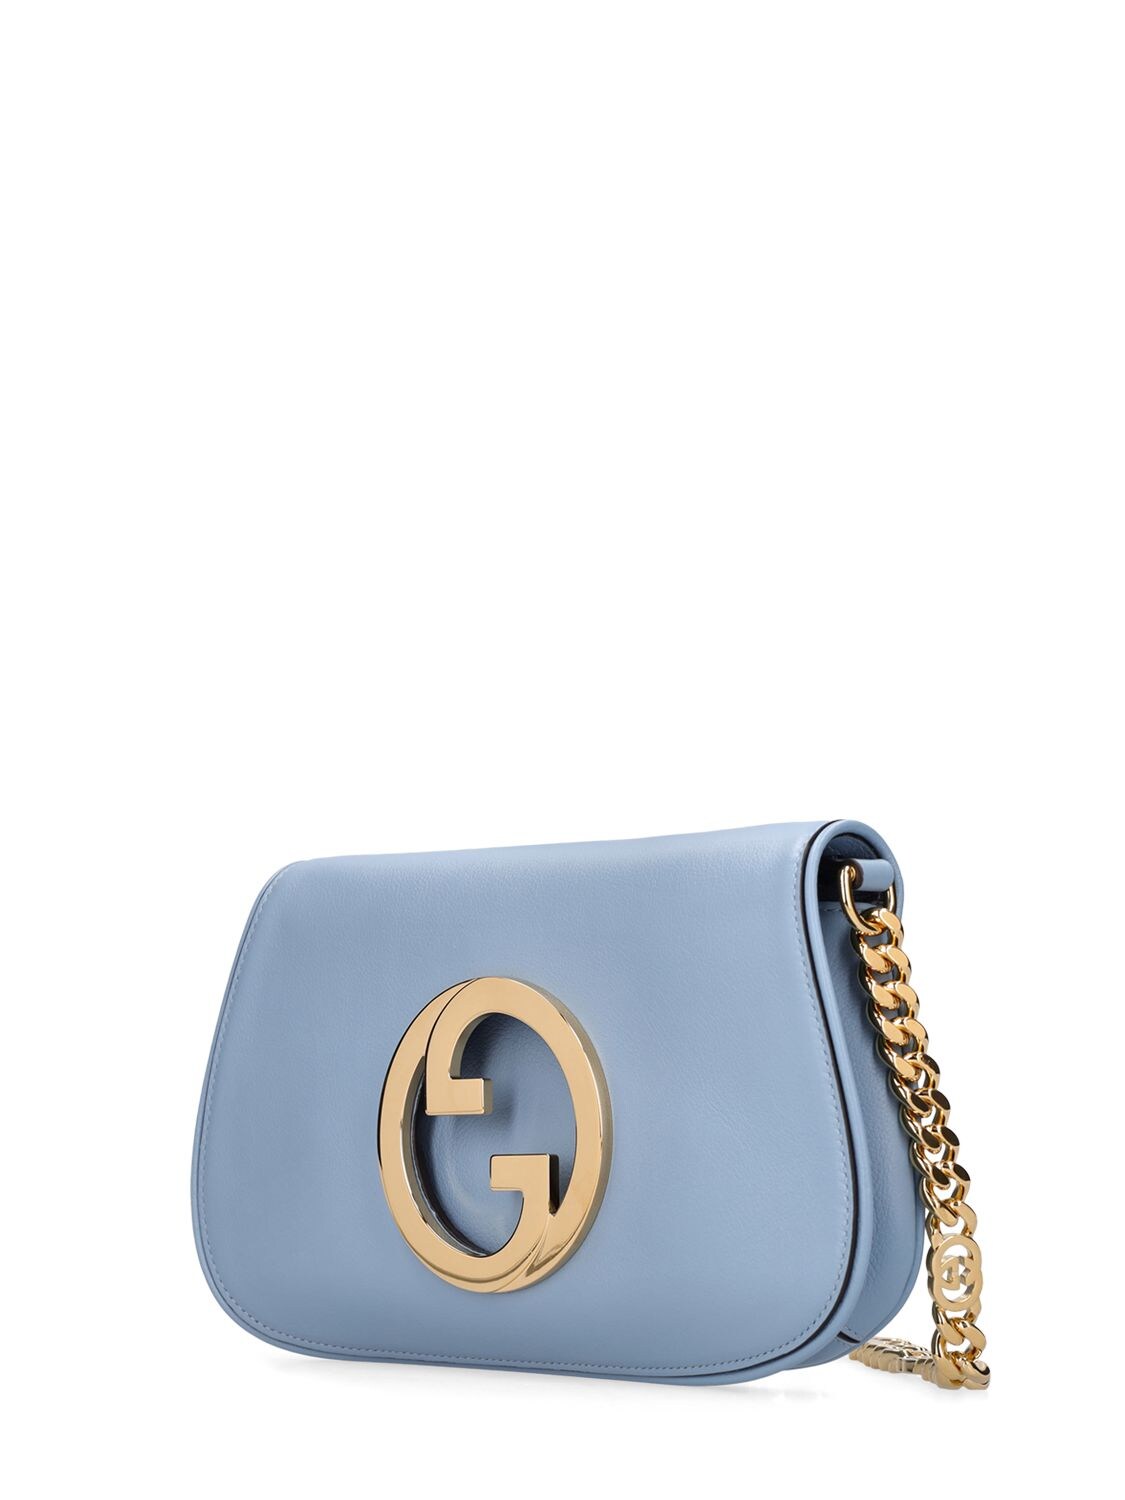 Gucci Blondie Leather Shoulder Bag In Cloudy Blue